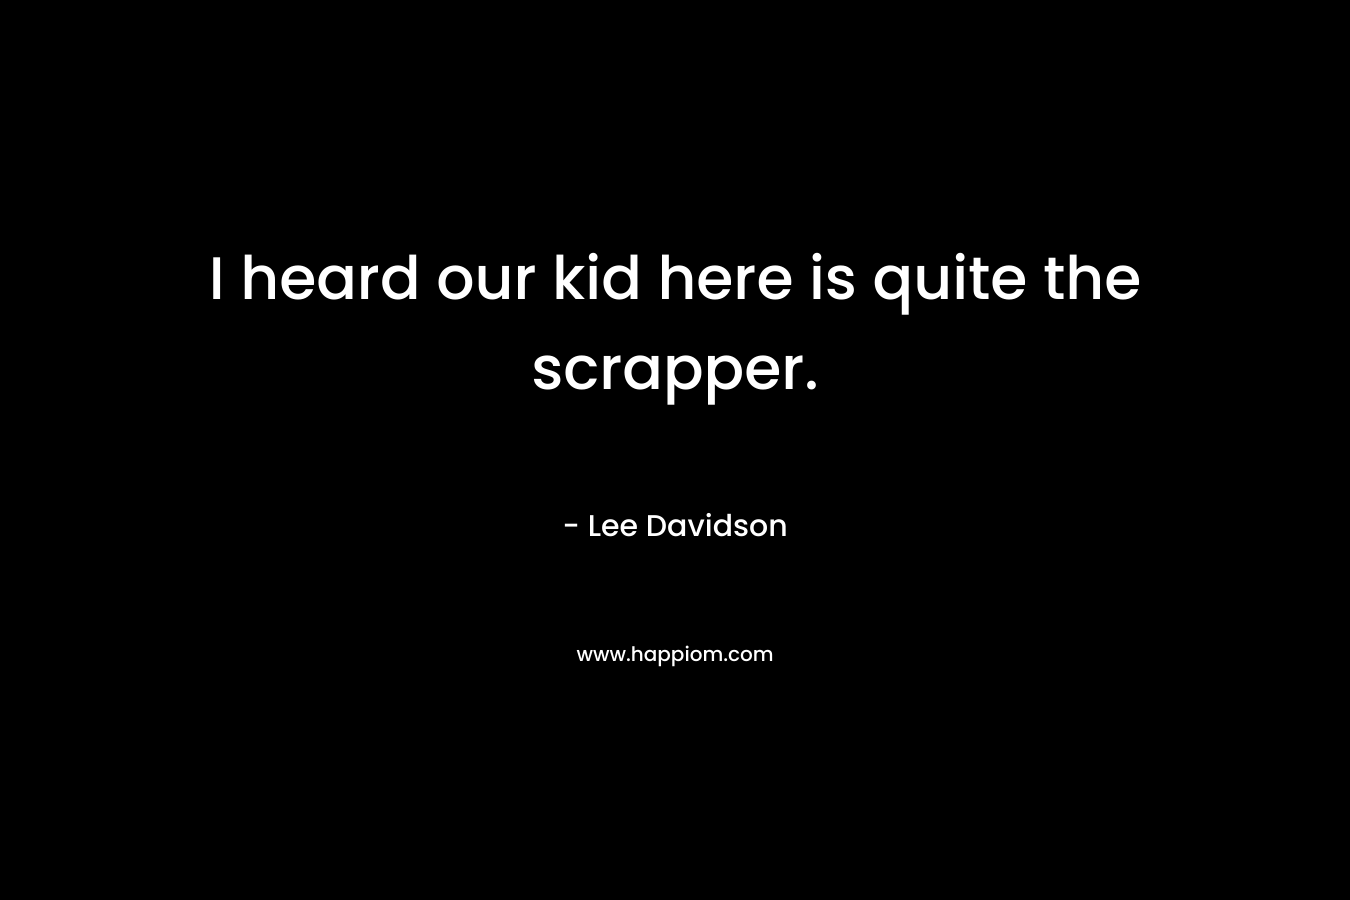 I heard our kid here is quite the scrapper. – Lee Davidson